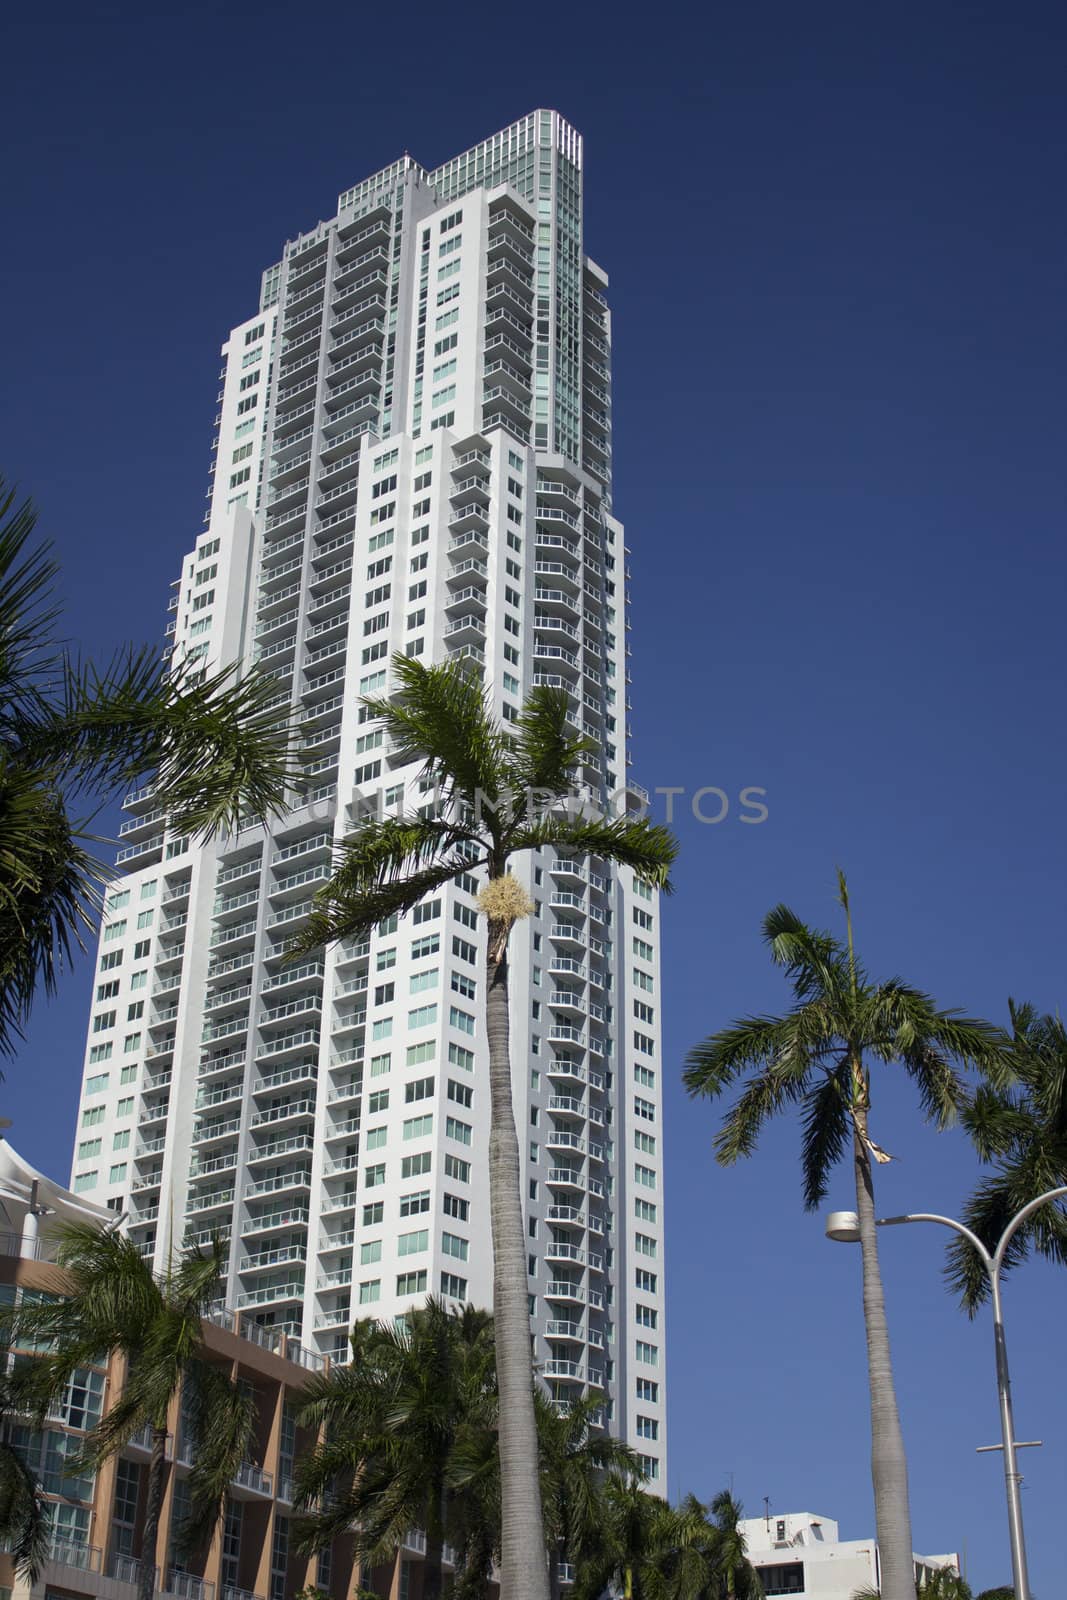 Building in Miami Florida by jeremywhat